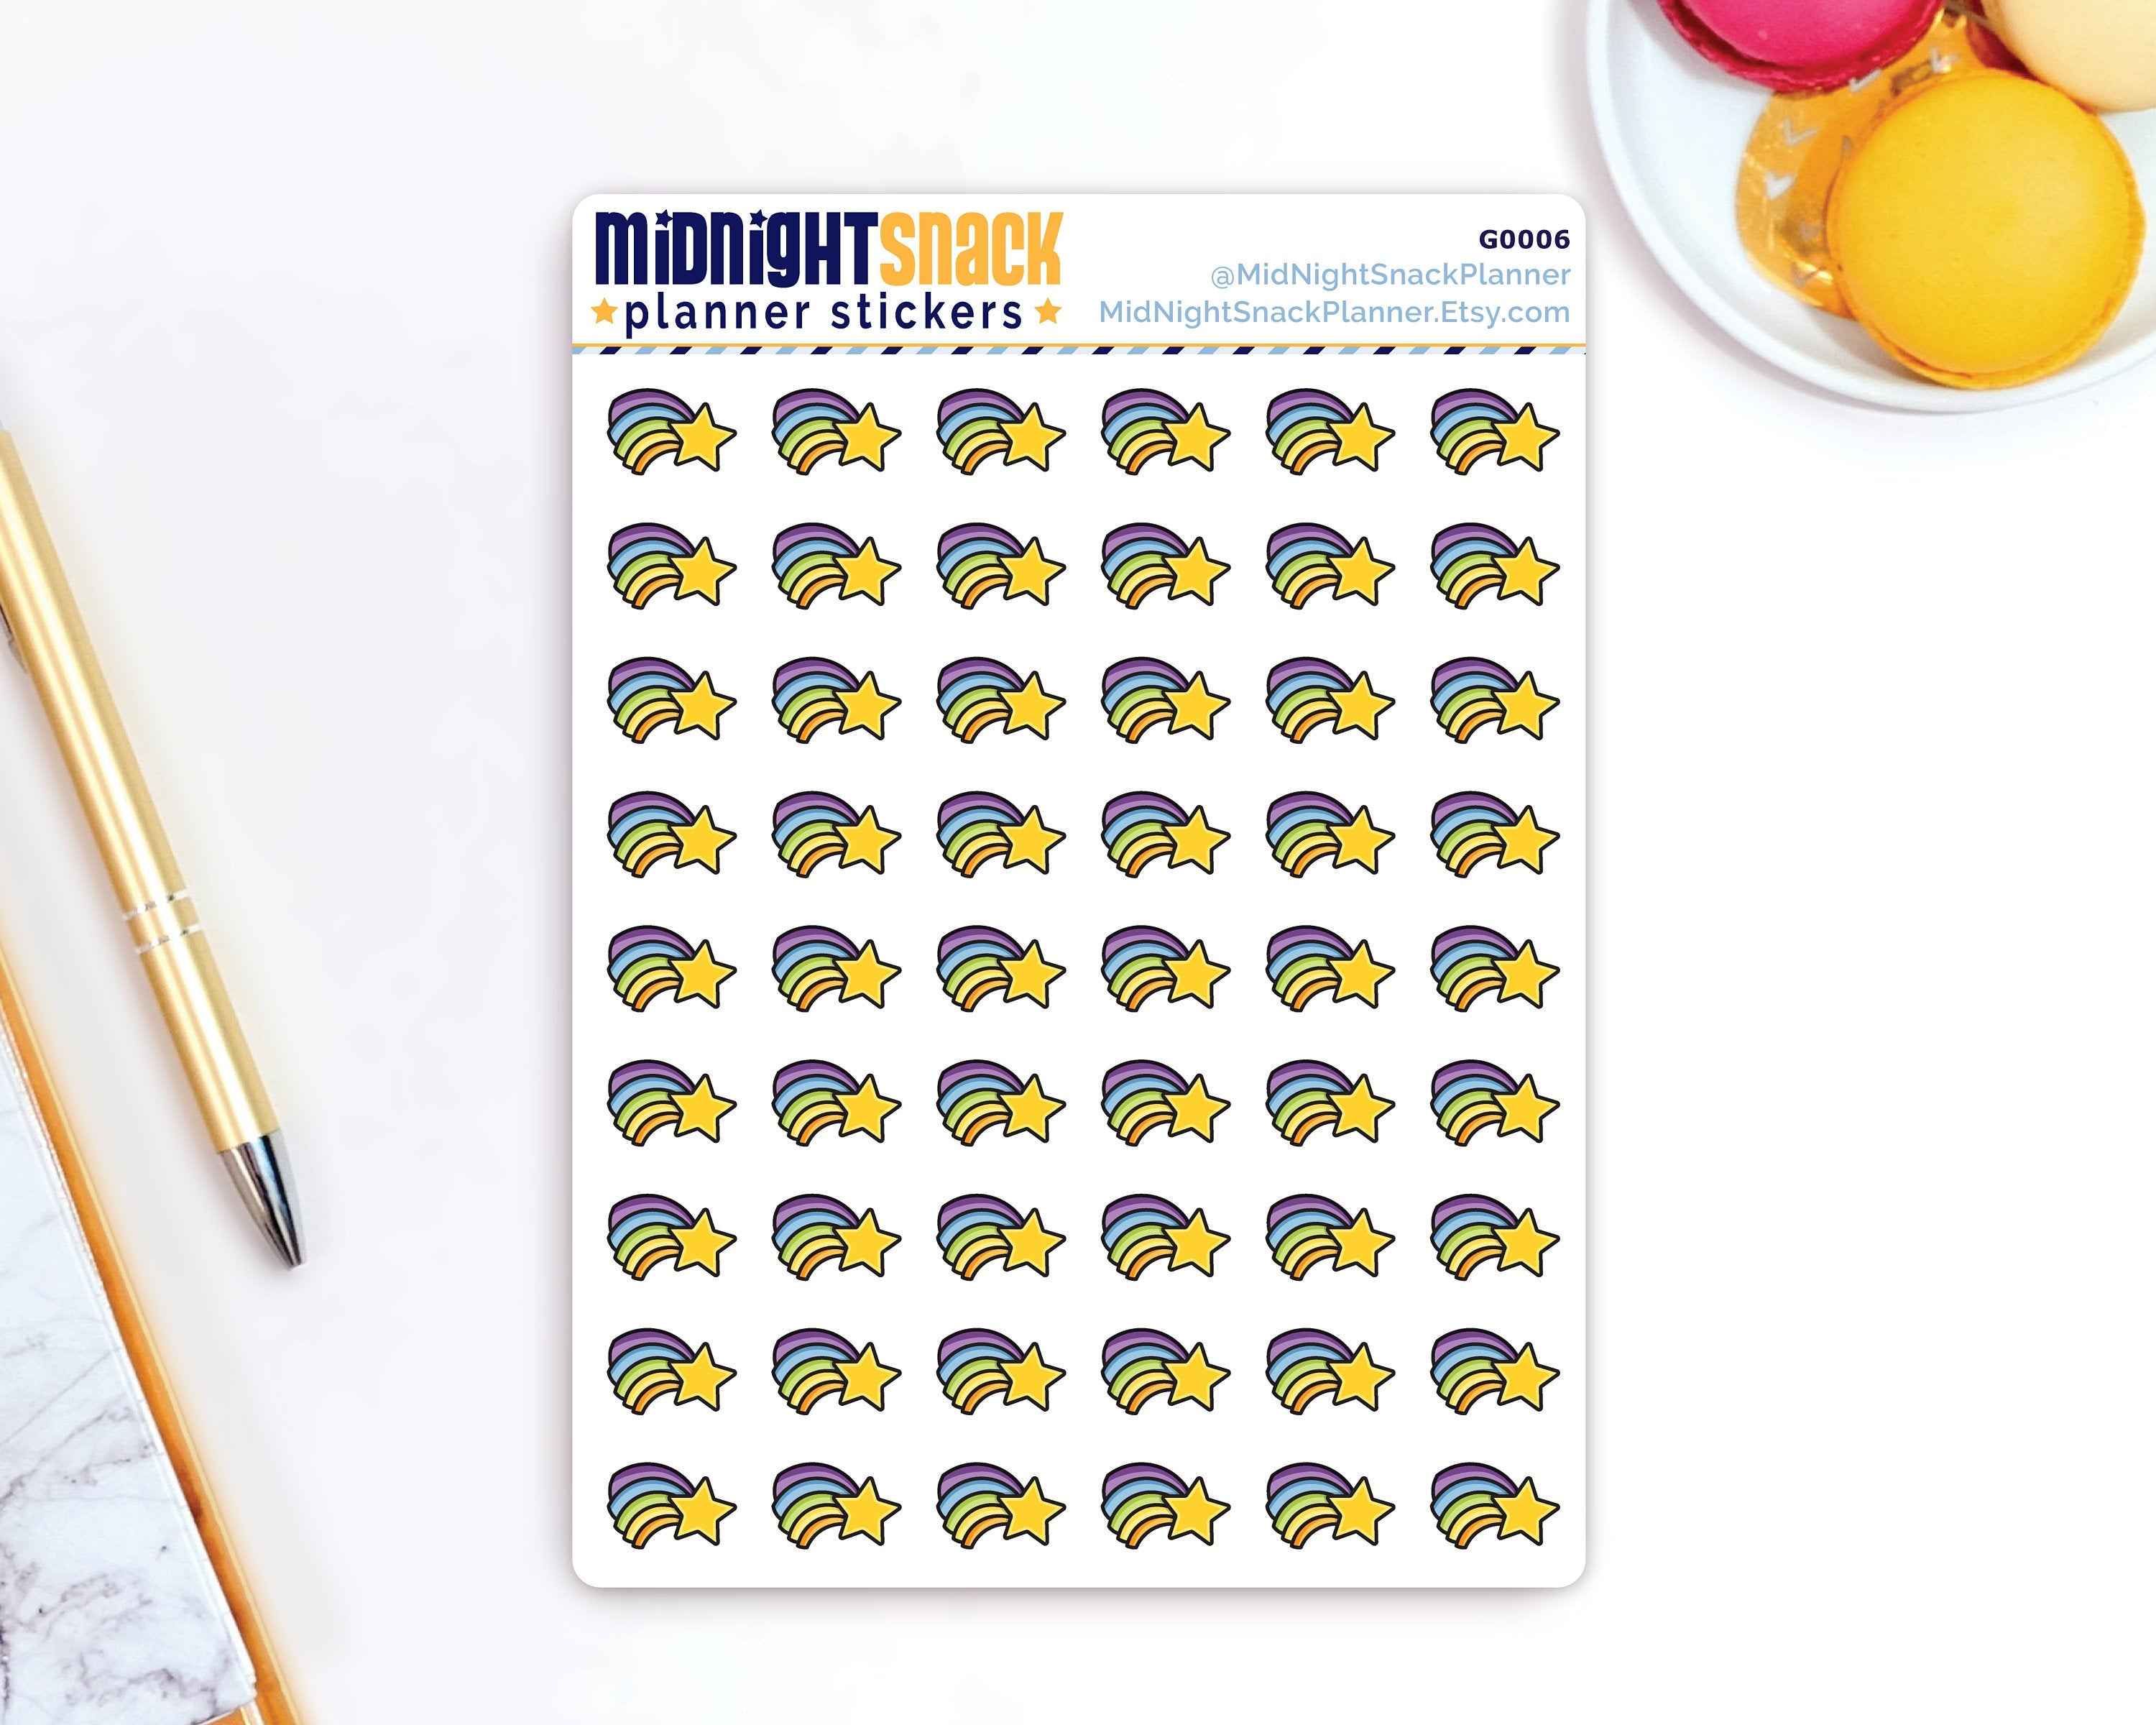 Shooting Star Icon: Goal Planning Planner Stickers Midnight Snack Planner